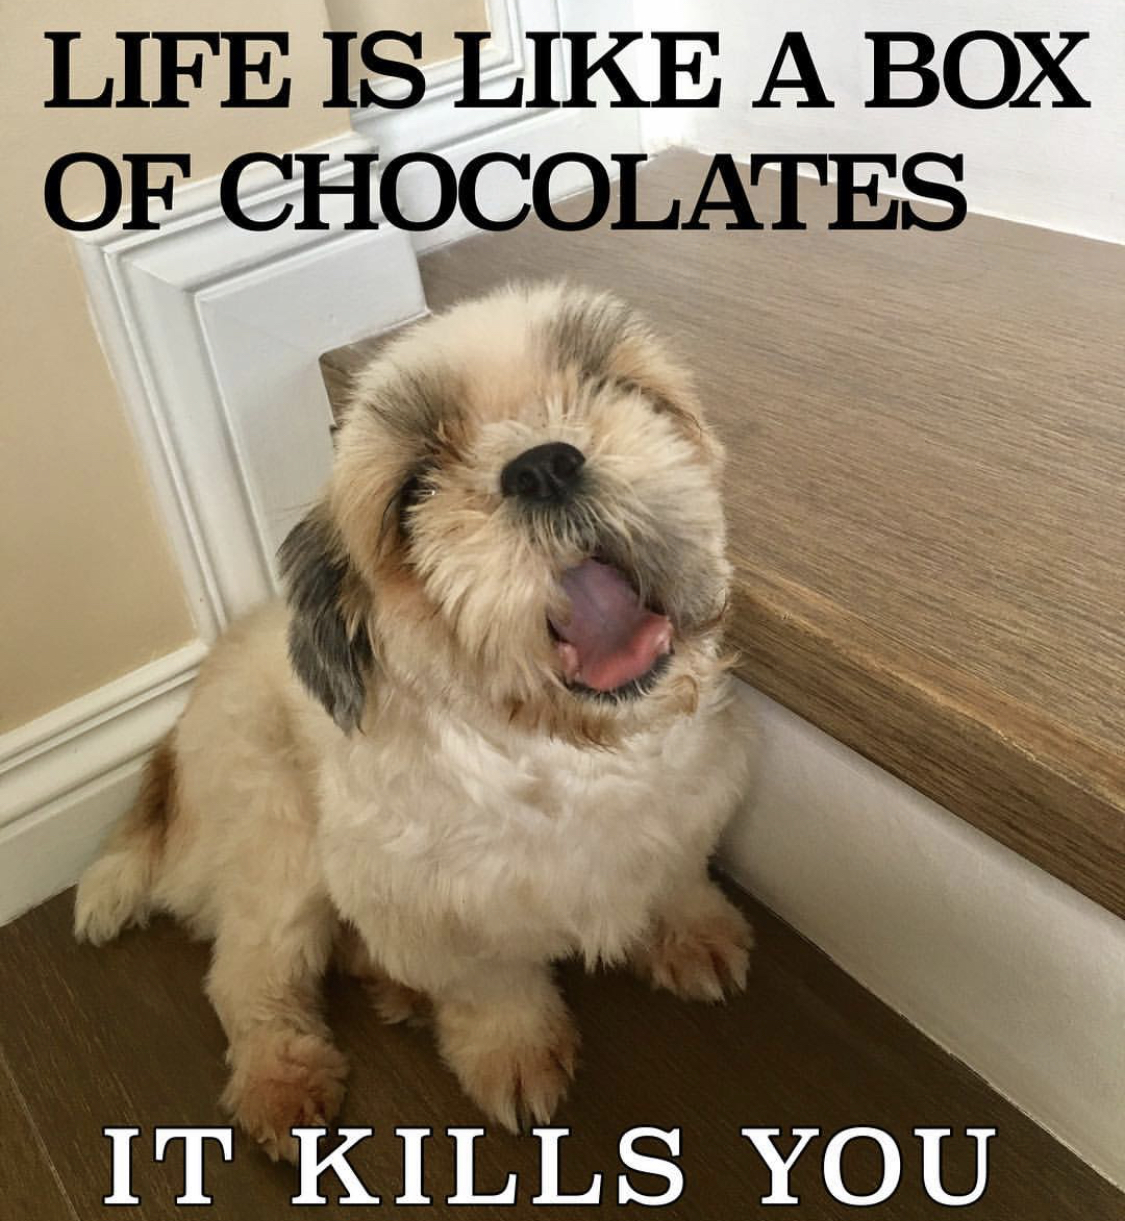 Shih Tzu sitting on the stairs while yawning photo with a text 